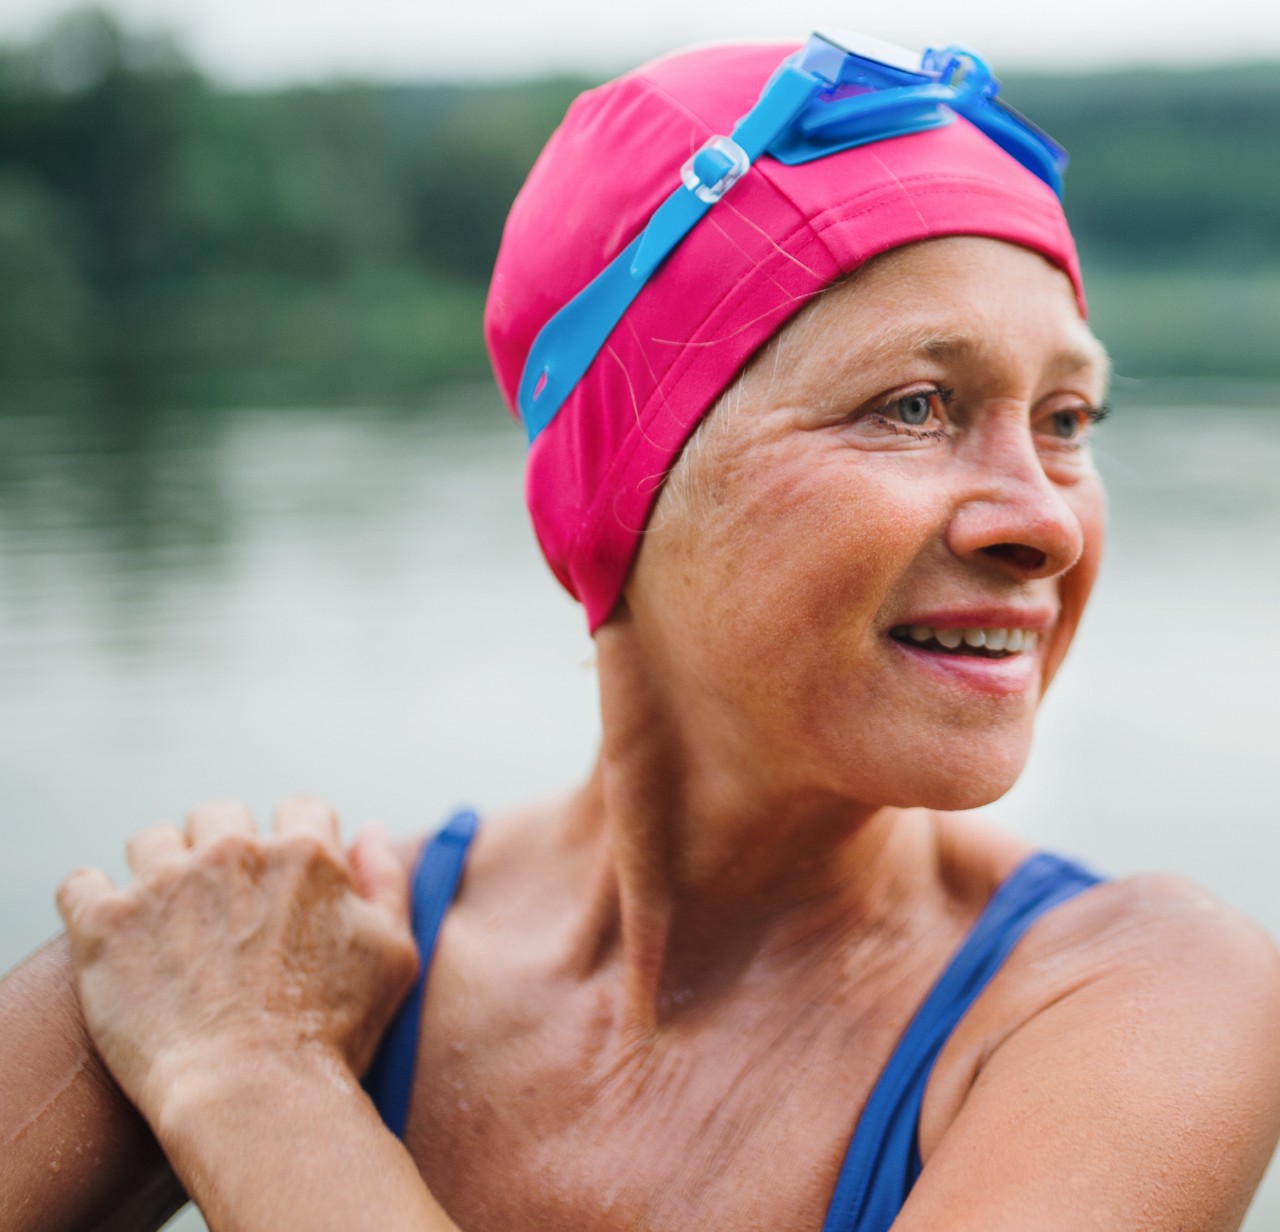 HCSC- A woman wearing a pink swim cap and blue swimsuit stands and smiles with a lake in the background